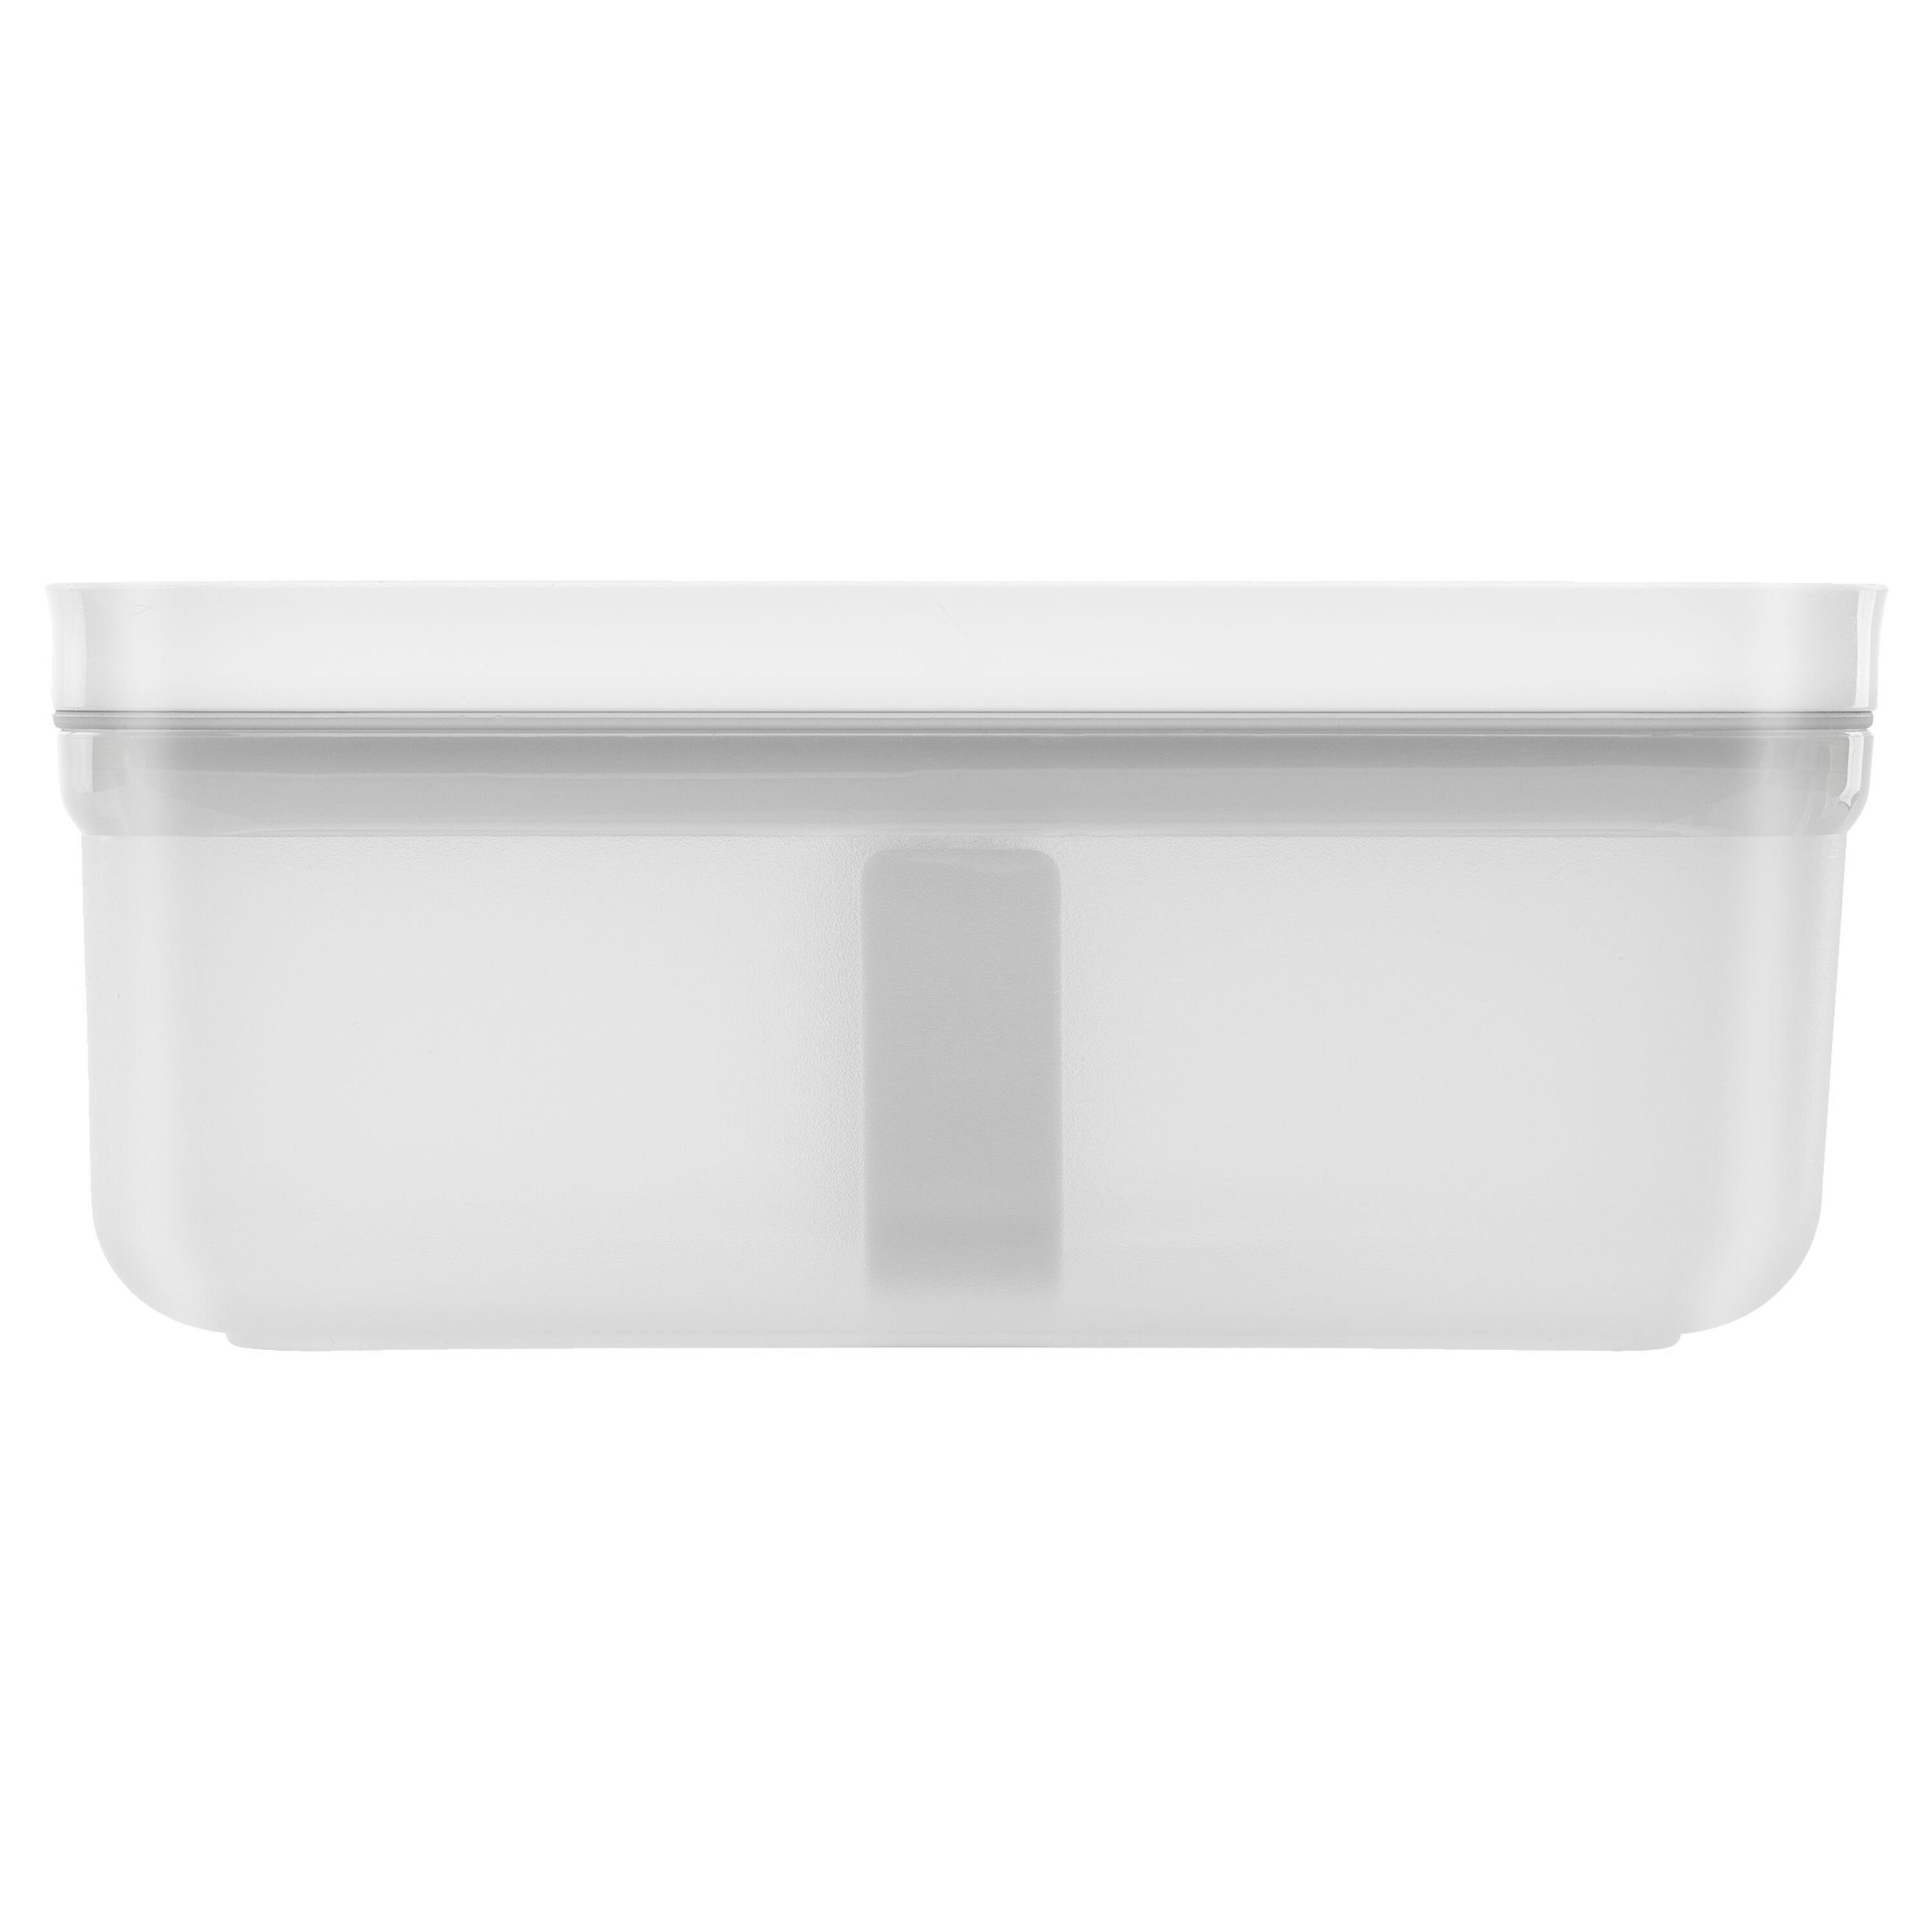 26oz Food Containers Meal Prep BPA FREE Microwavable Reusable Plastic Lunch  Box